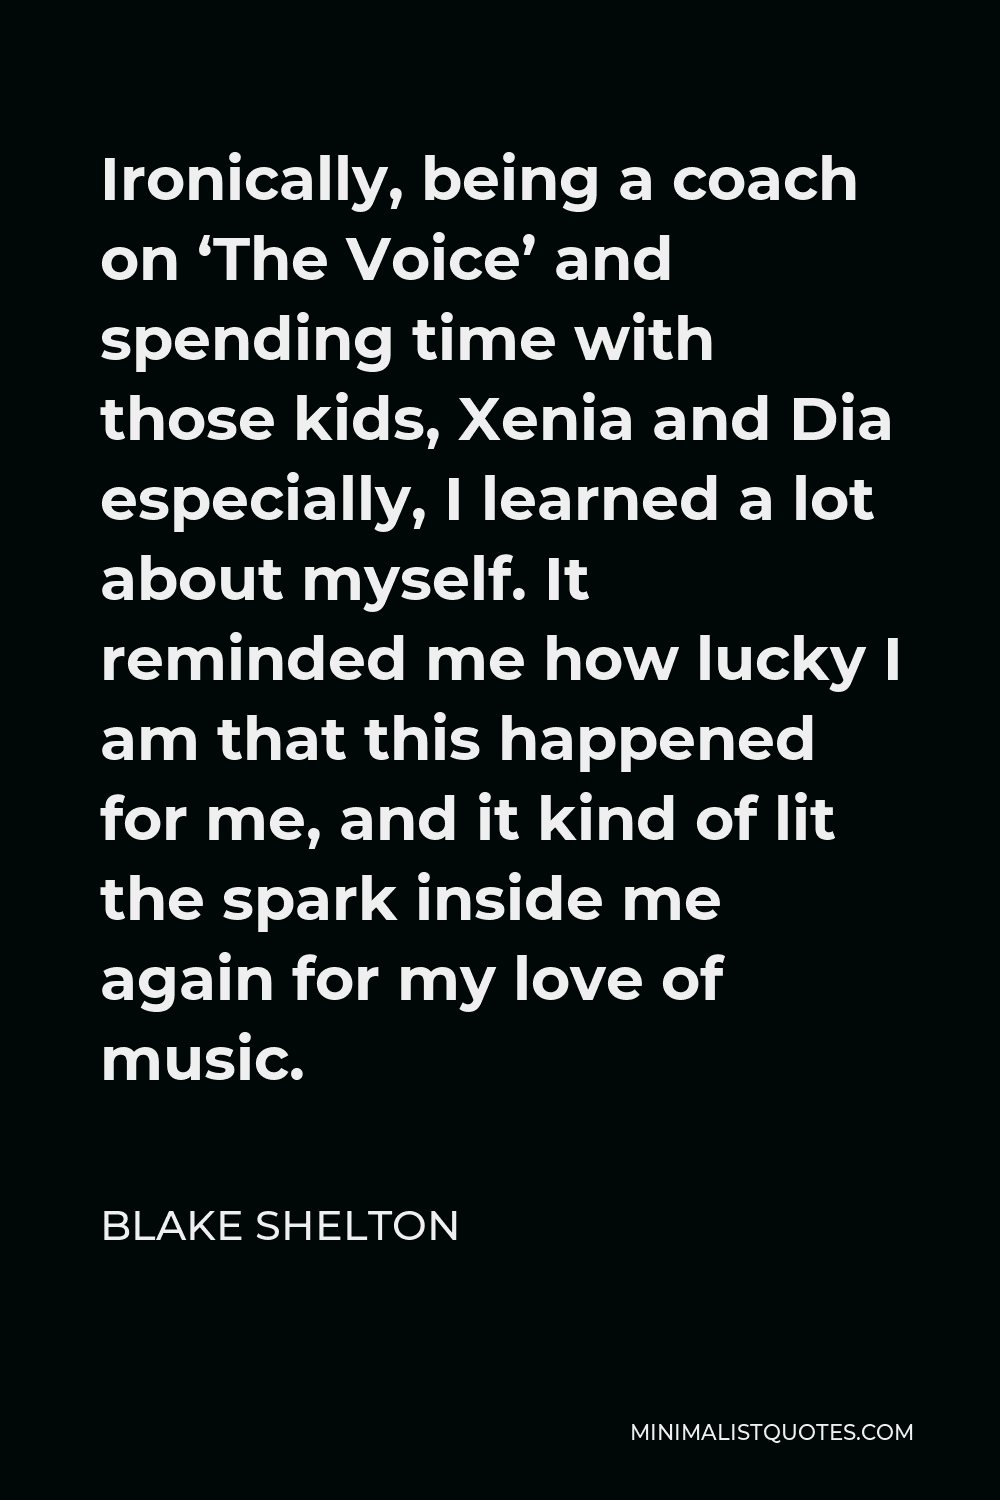 Blake Shelton Quote - Ironically, being a coach on ‘The Voice’ and spending time with those kids, Xenia and Dia especially, I learned a lot about myself. It reminded me how lucky I am that this happened for me, and it kind of lit the spark inside me again for my love of music.